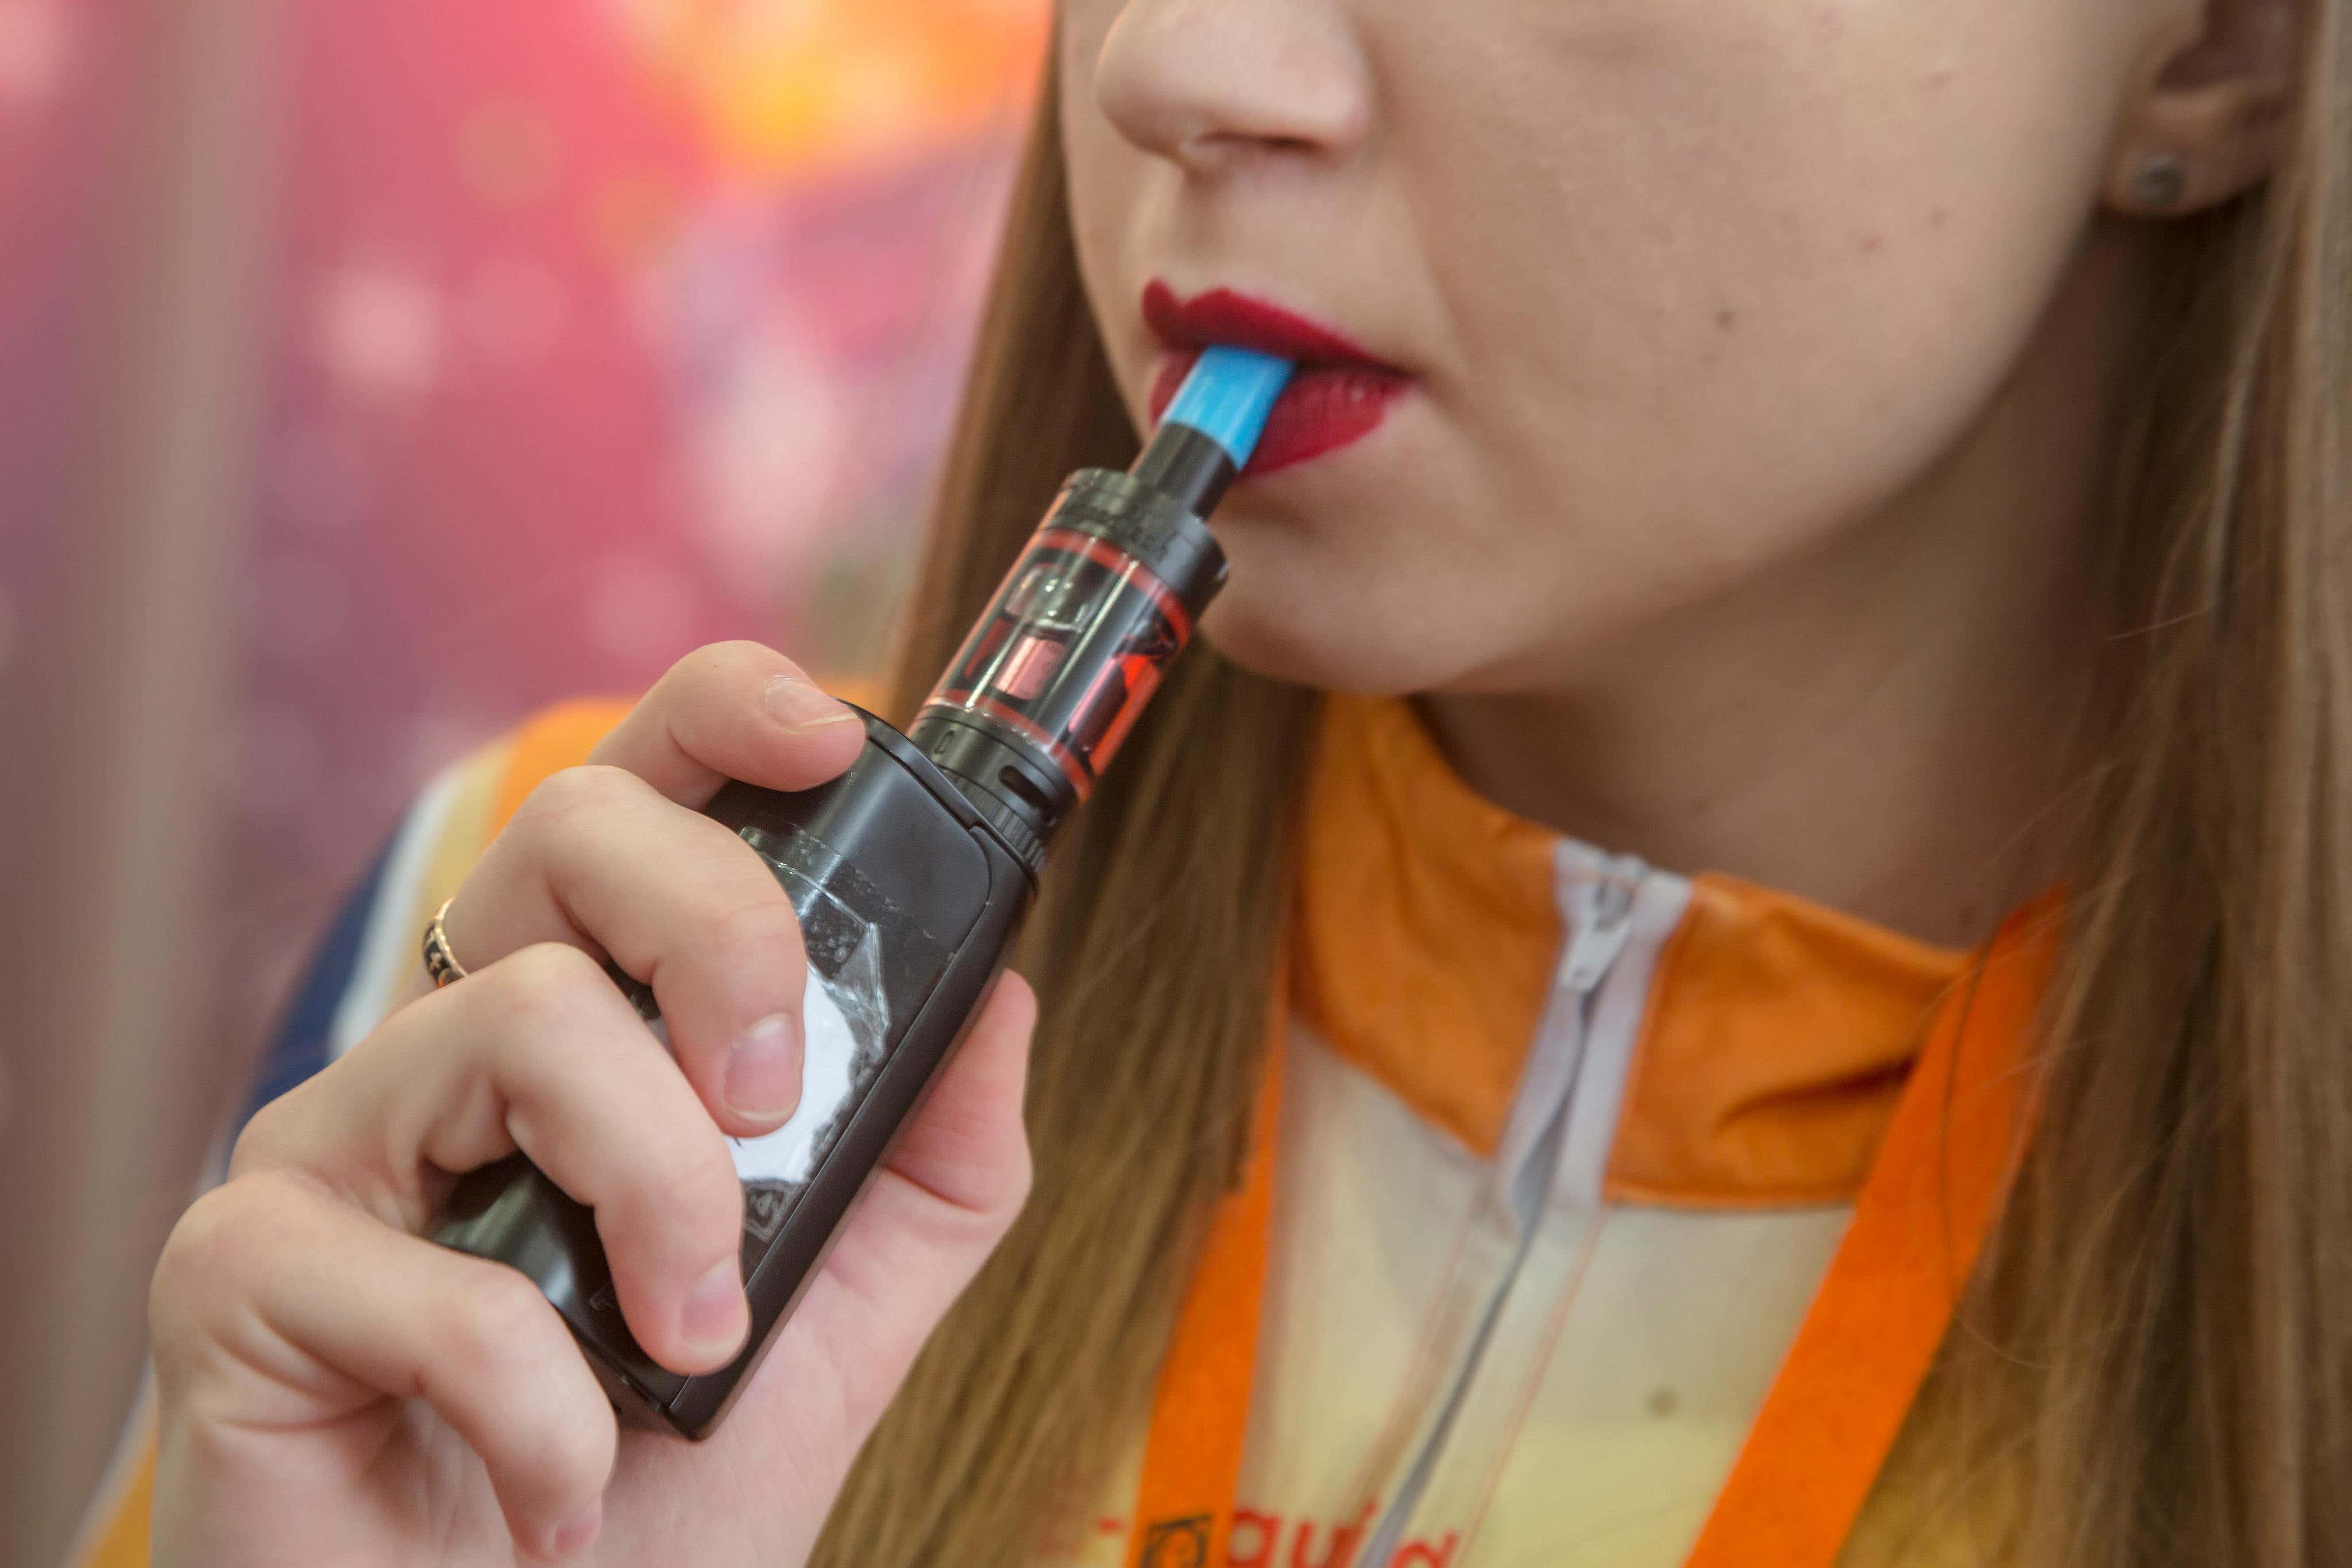 Vapes laced with spice are being used to spike people in what police have warned is a ‘very dangerous new threat’